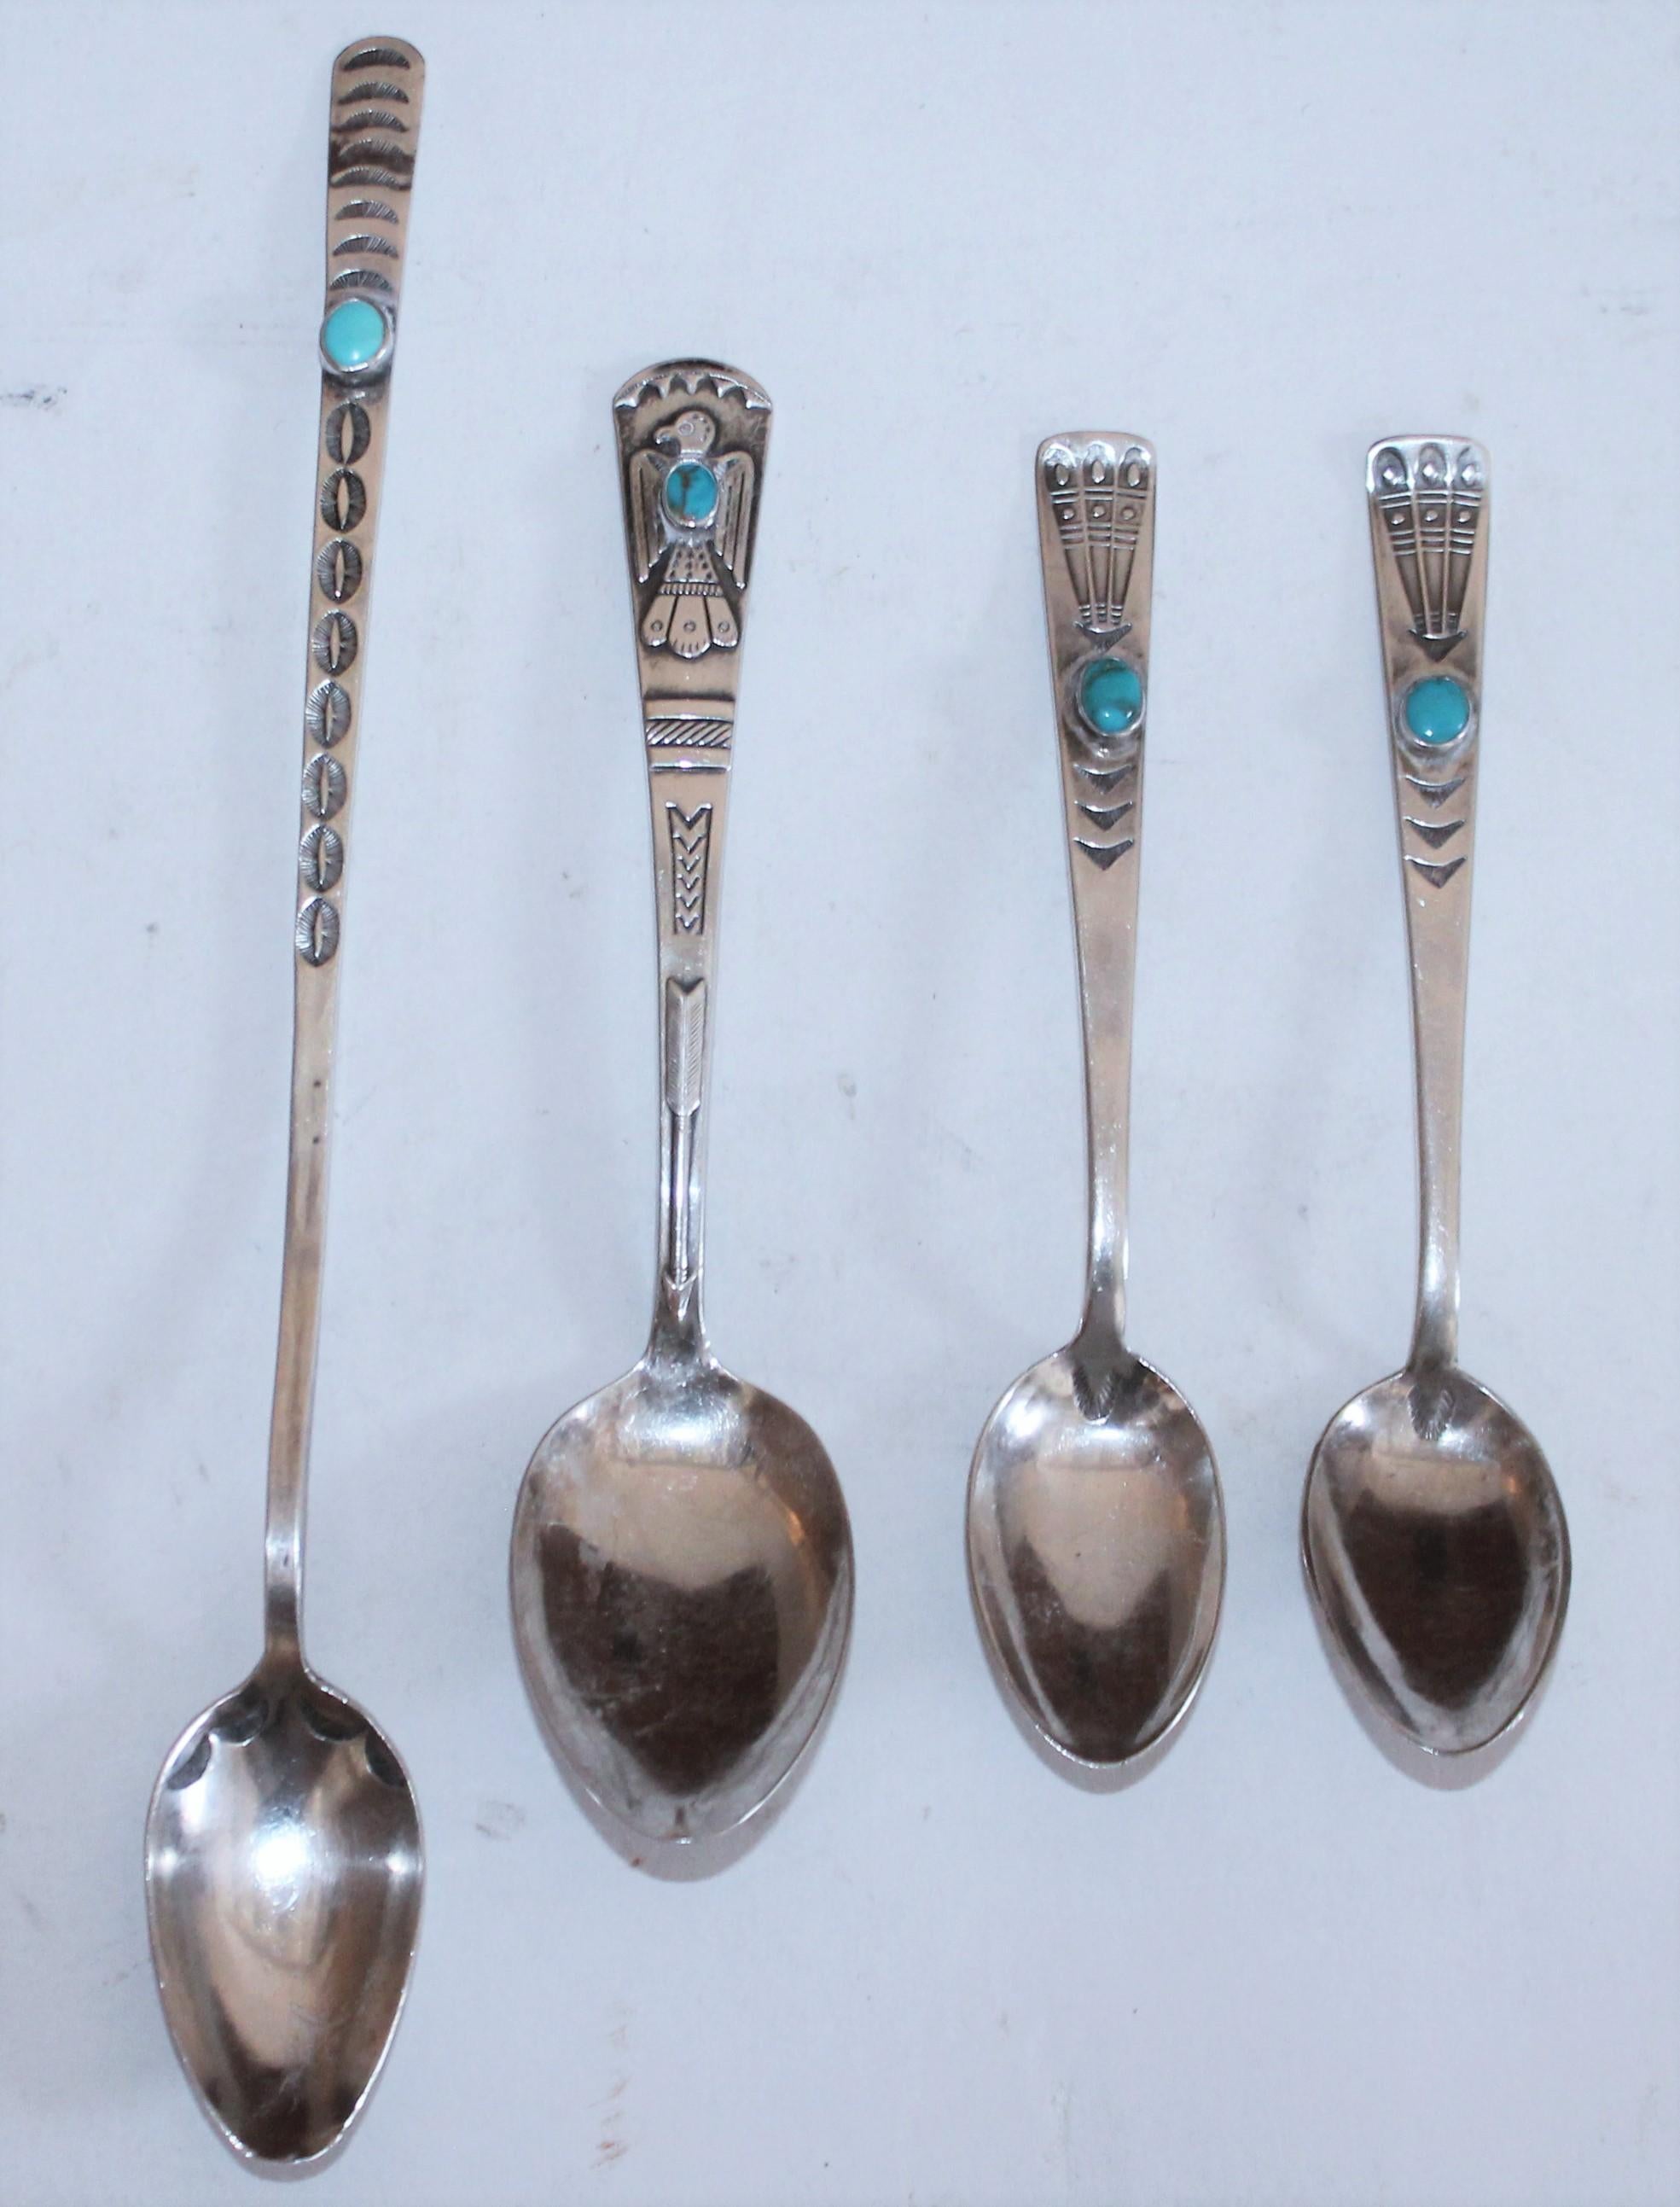 Set of four native American silver with turquoise spoons.
Measures: Large spoon 8